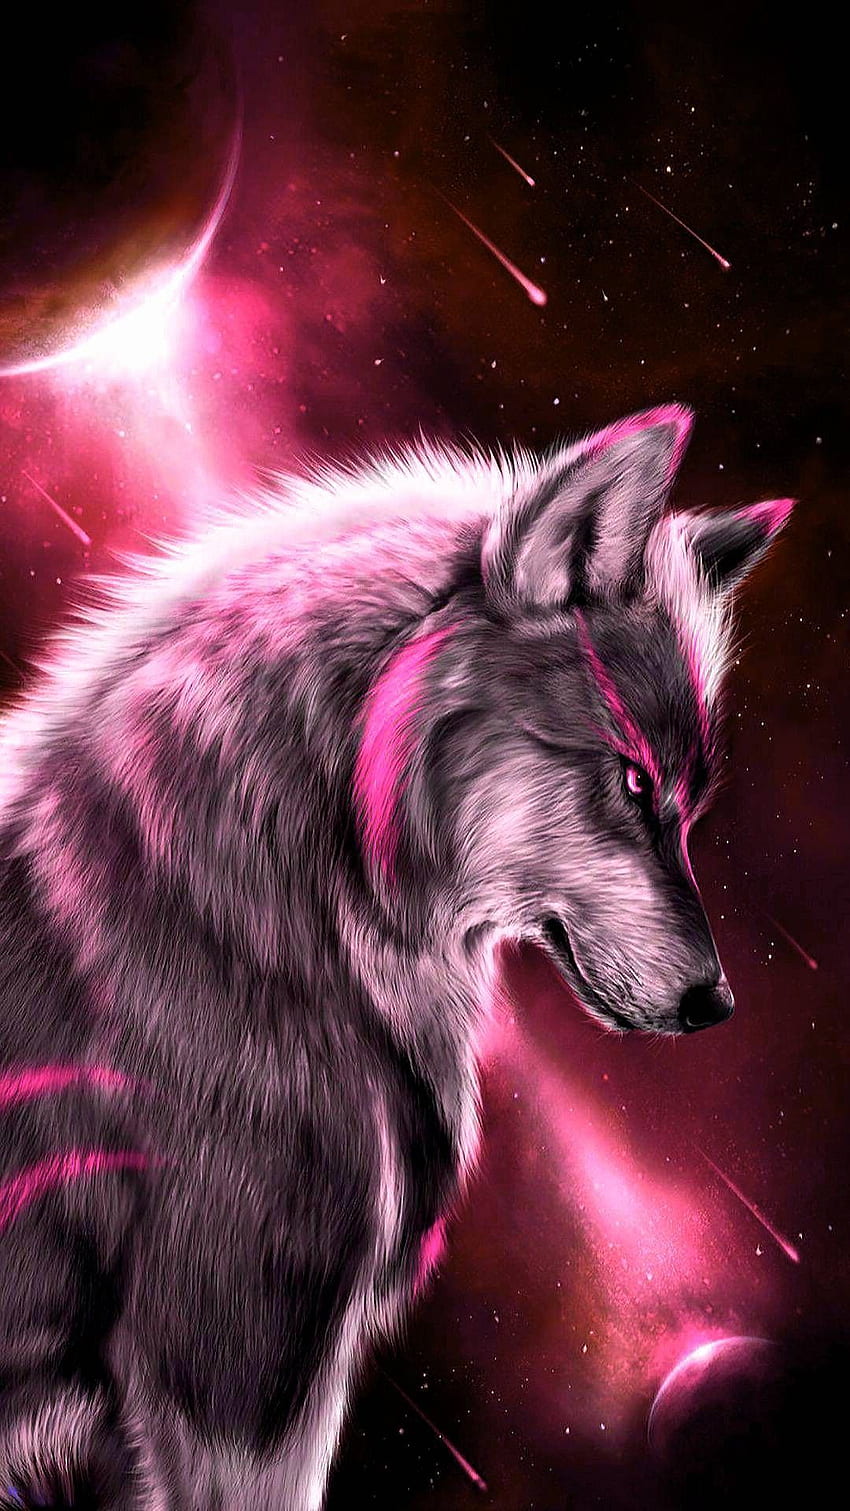 Anime Wolf W/ Wings by Wolffang1998 on DeviantArt